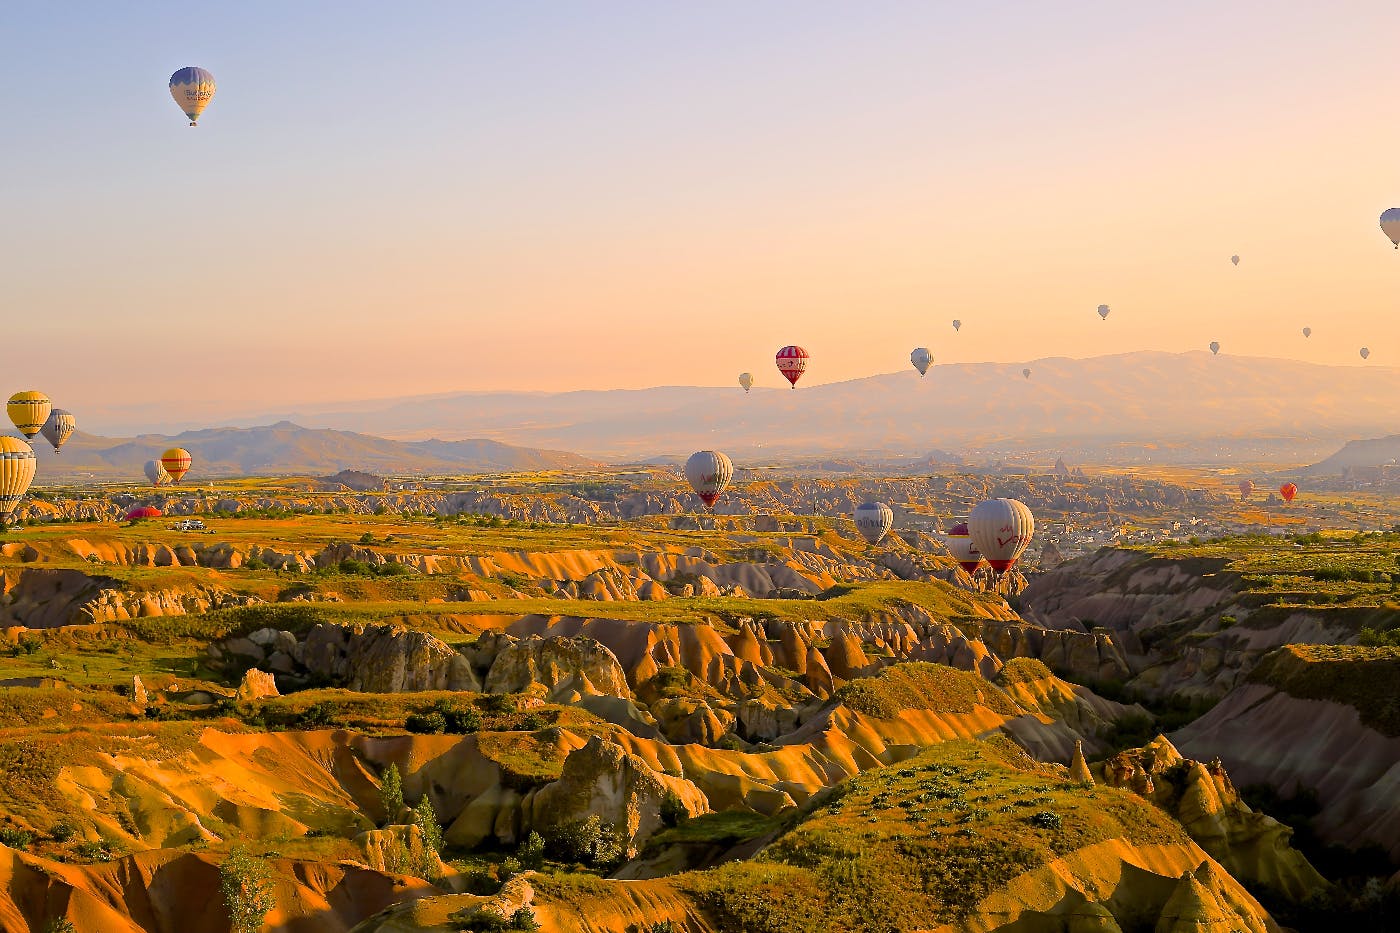 A beautiful landscape with hot air balloons everywhere